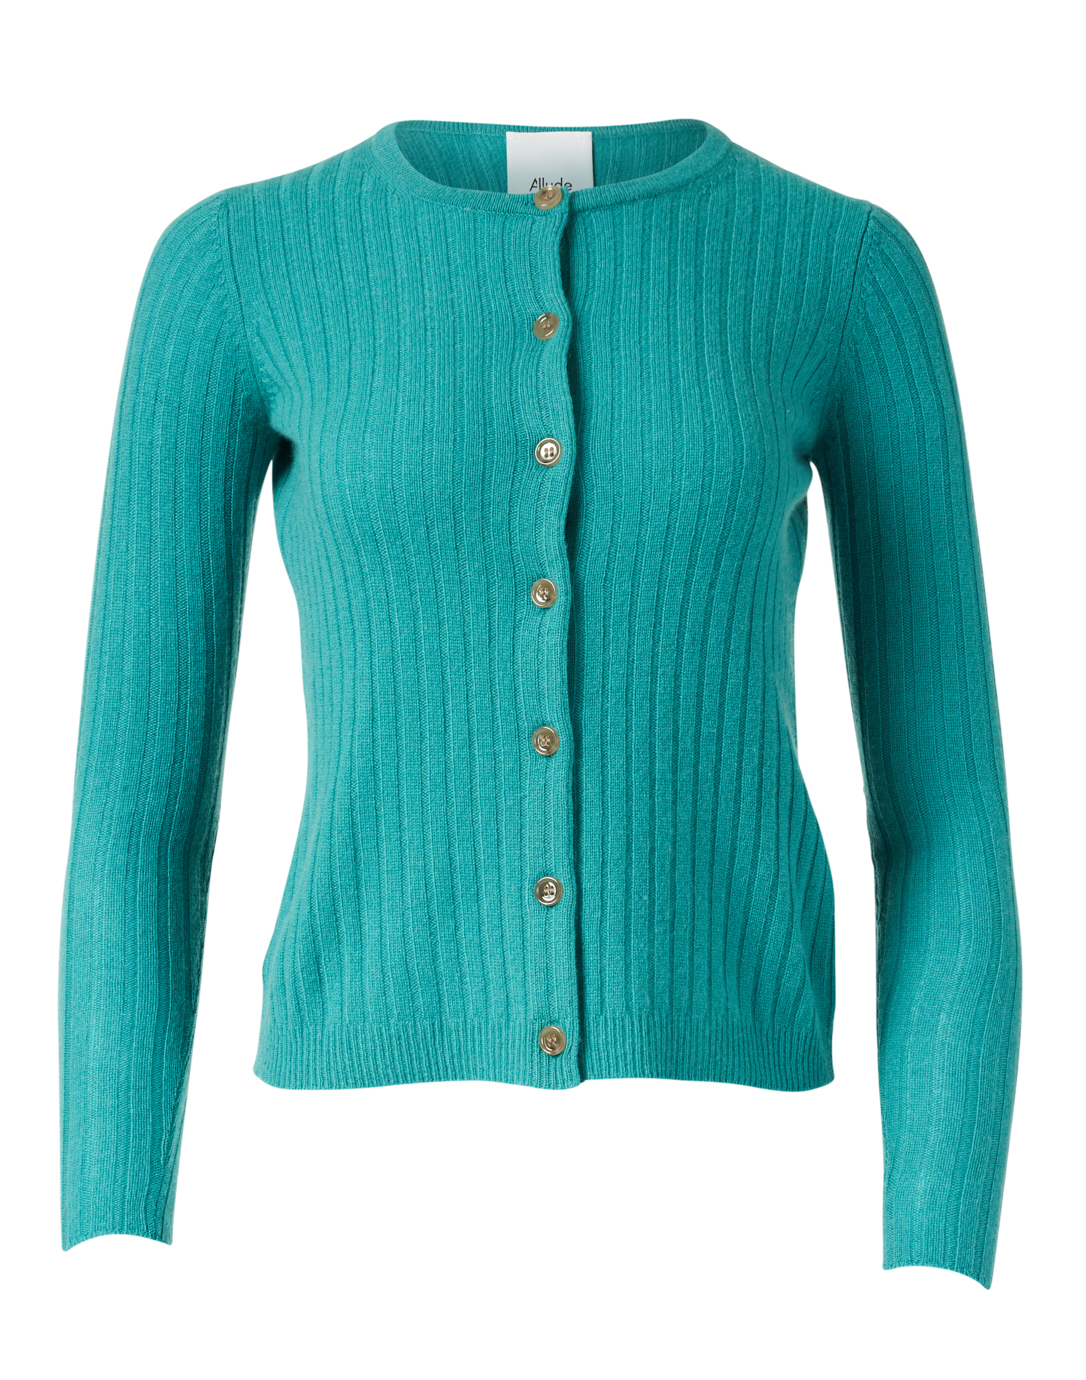 Jade Green Ribbed Wool and Cashmere Cardigan | Allude | Halsbrook